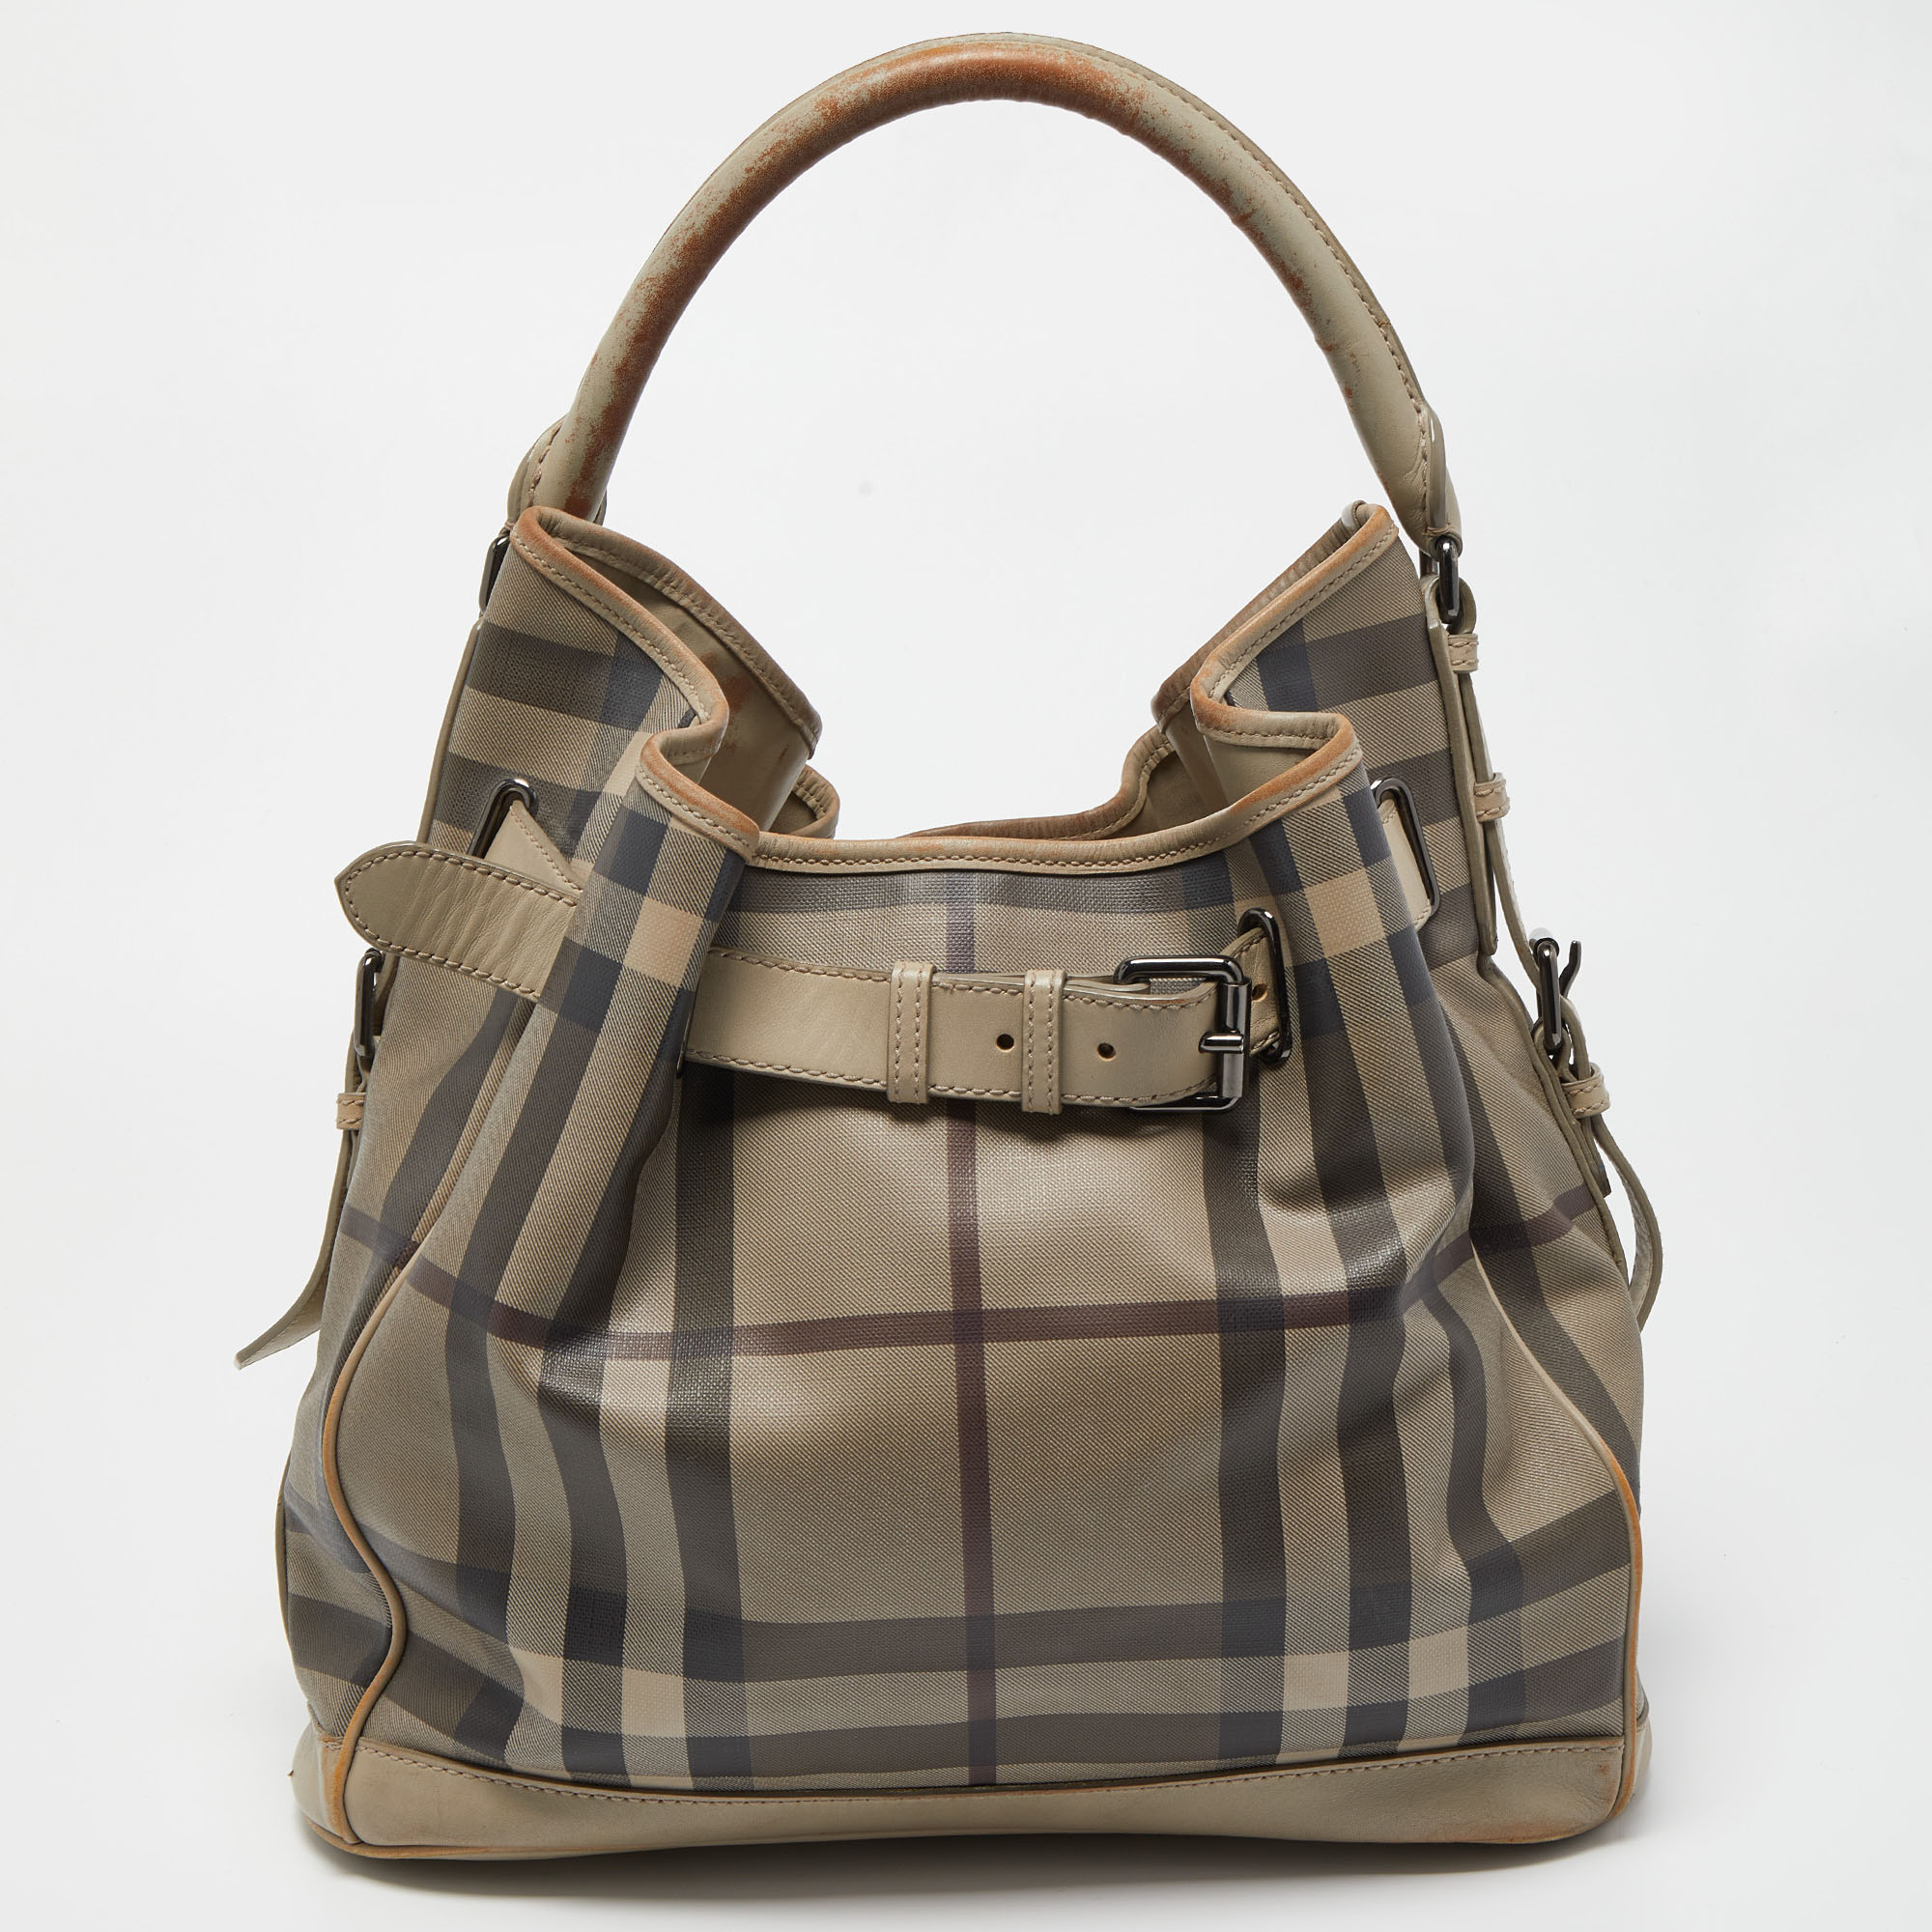 This Walden hobo from Burberry is crafted from Smoked Check PVC and completed with leather trims. The canvas lined interior will hold your daily essentials and the hobo is complete with a single handle. Simple in design it is perfect for everyday use.